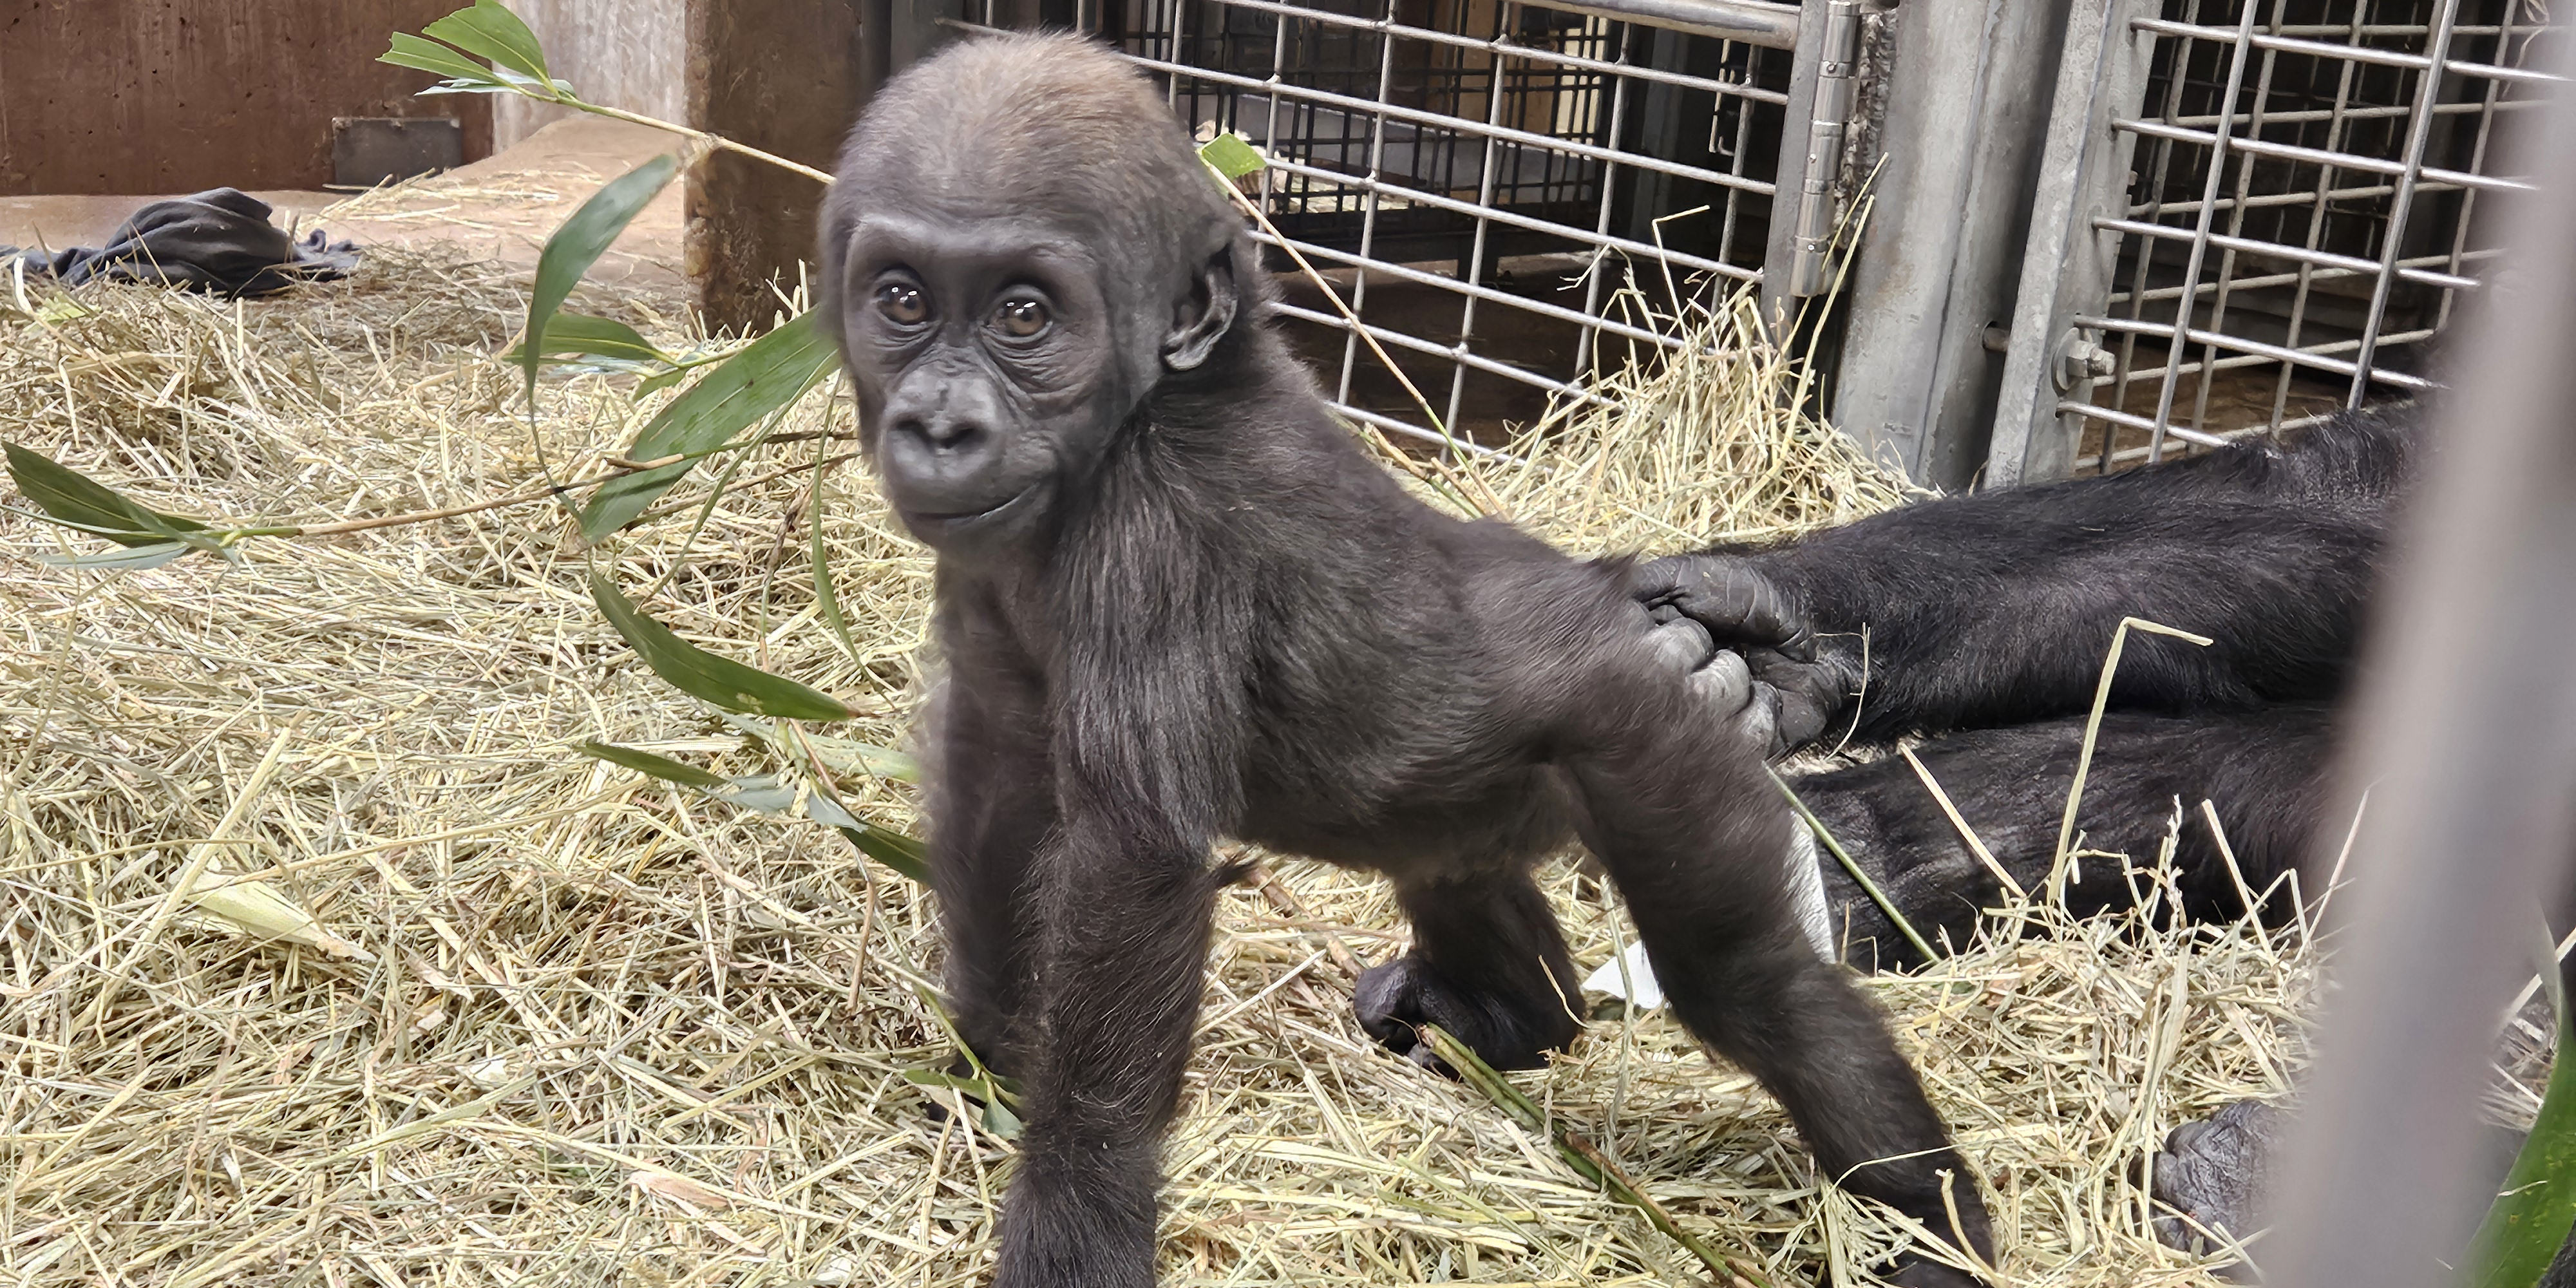 Baby gorilla poses on all fours and looks into the camera.